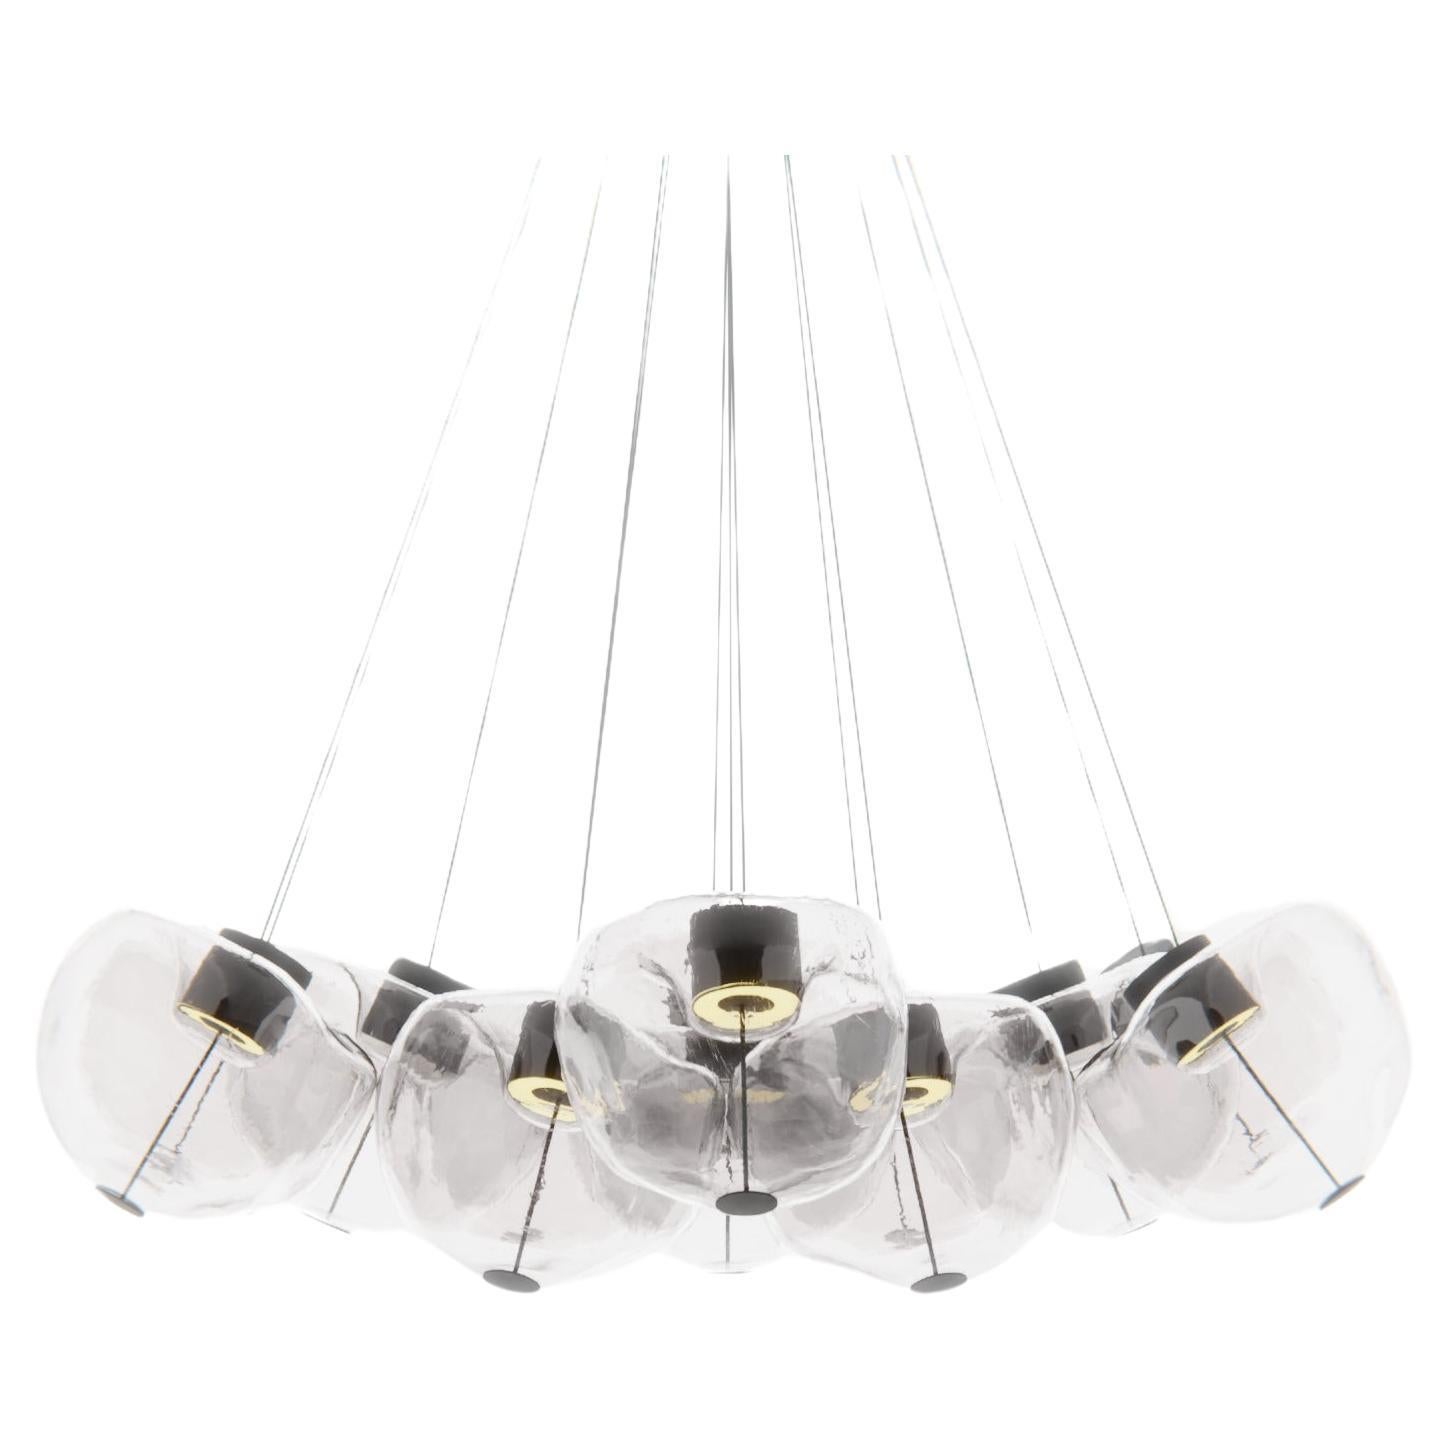 13 lights artistic Murano glass chandelier with amorphous spheres